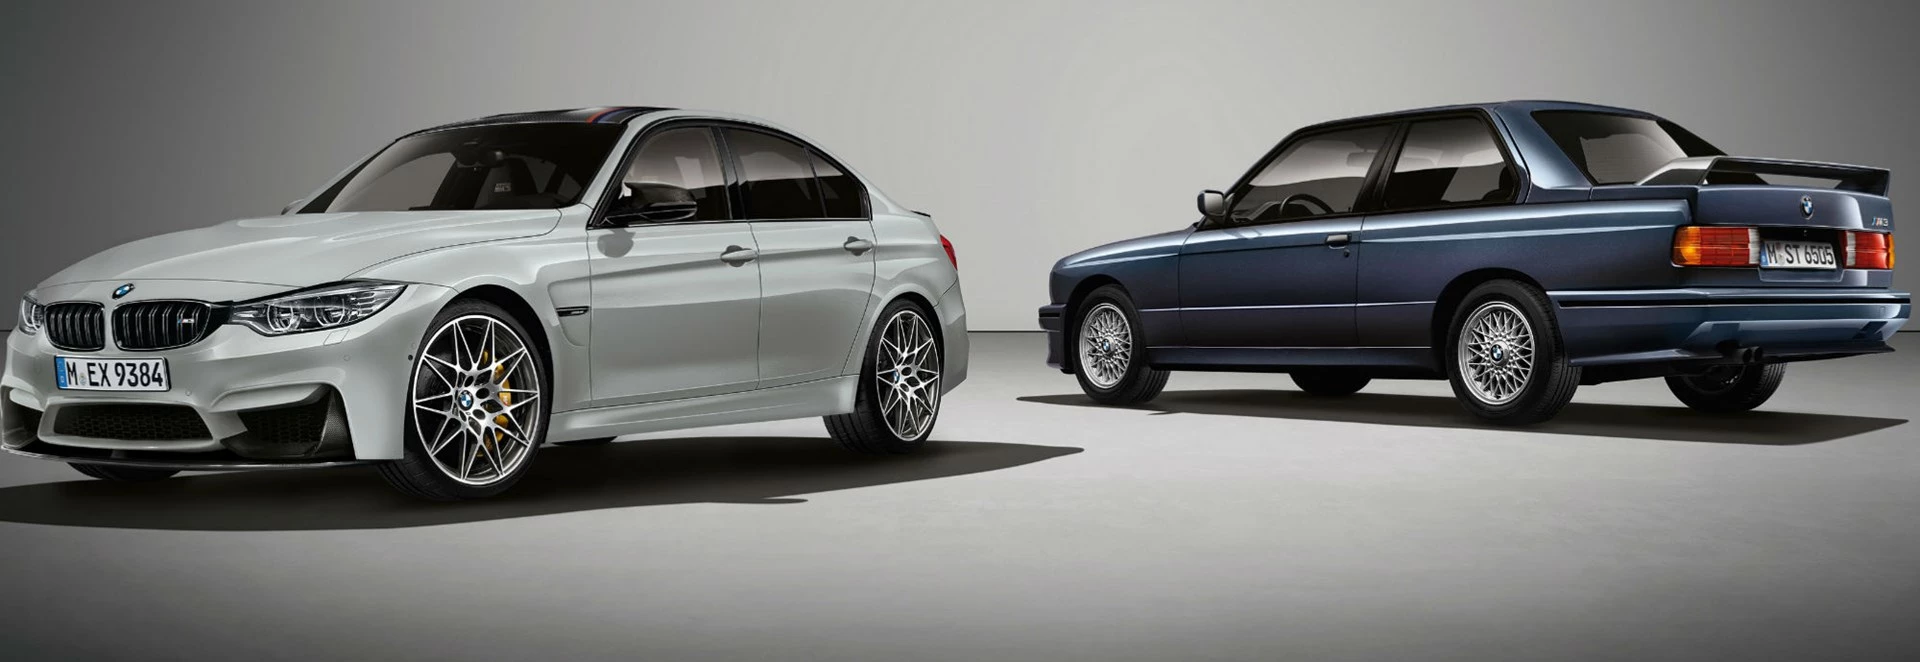 BMW M3 30 Jahre Edition celebrates 30 years of the M3 